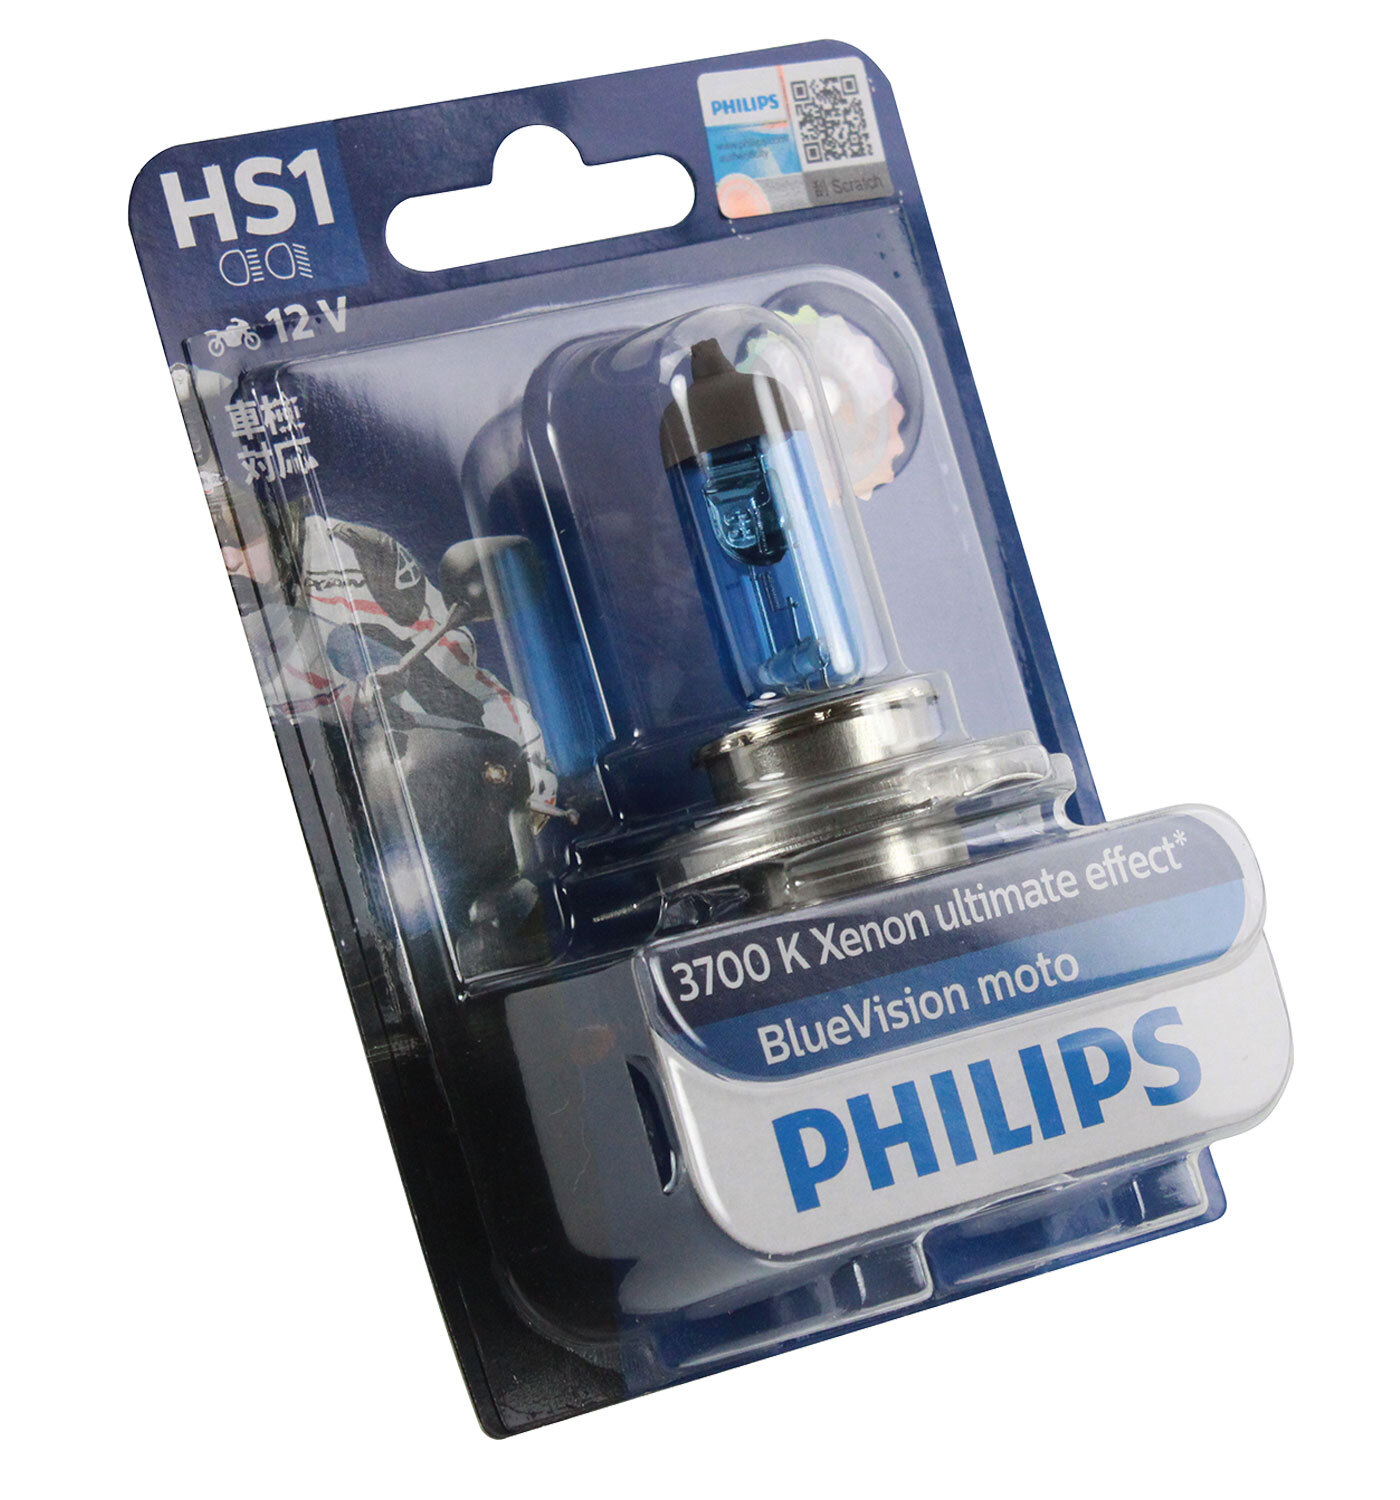 Genuine PHILIPS Motorcycle Blue Vision Headlight Bulb HS1 12V 35/35W PX43T -38